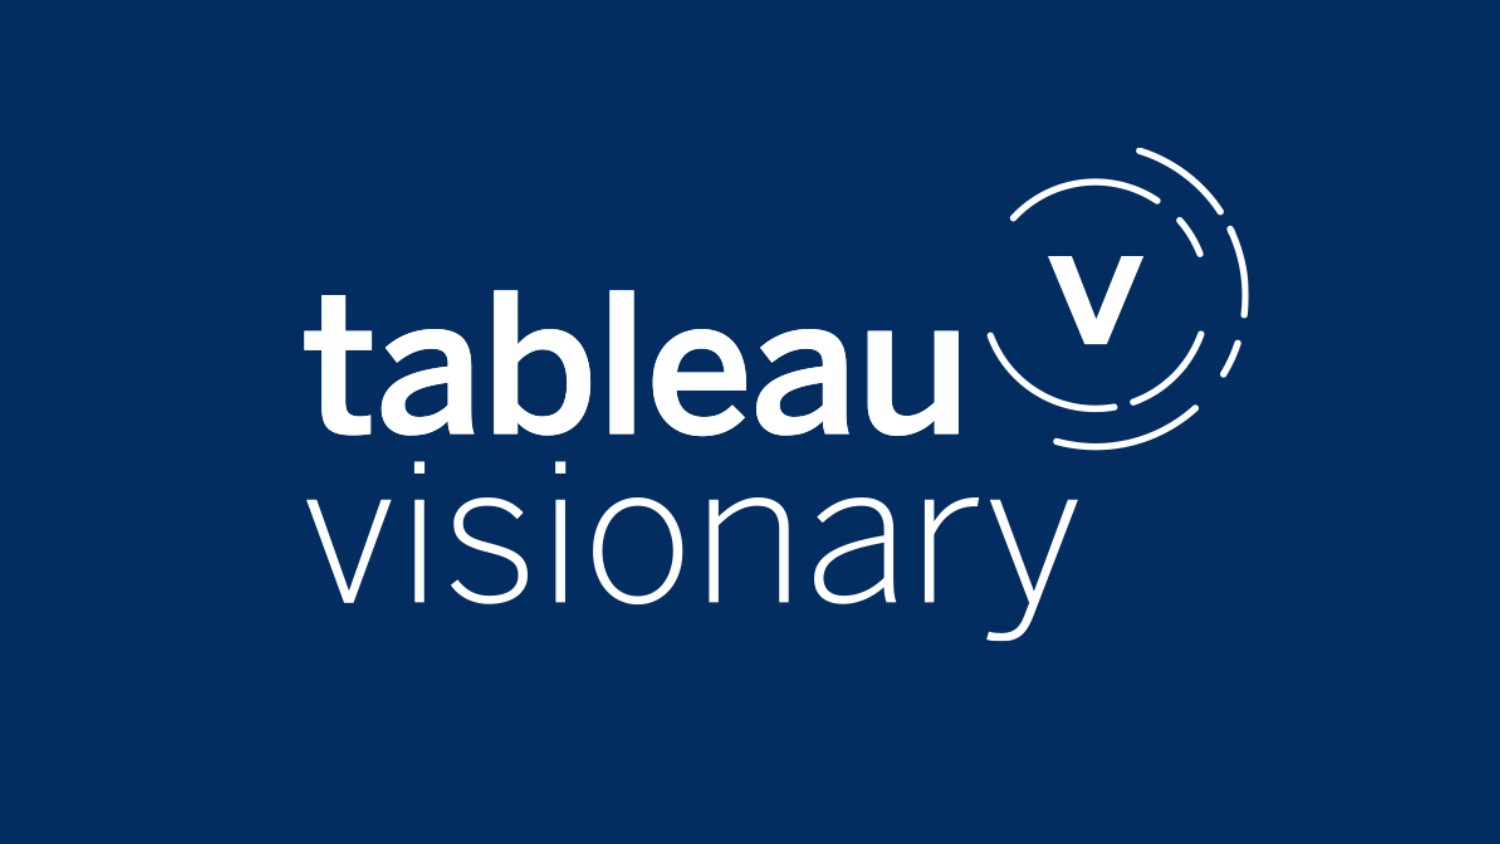 Tableau on X: Tableau Visionaries demonstrate mastery of Tableau, teach in  the community, and collaborate with others to help everyone see and  understand data. Nominate yourself or a leader for the #TableauVisionary